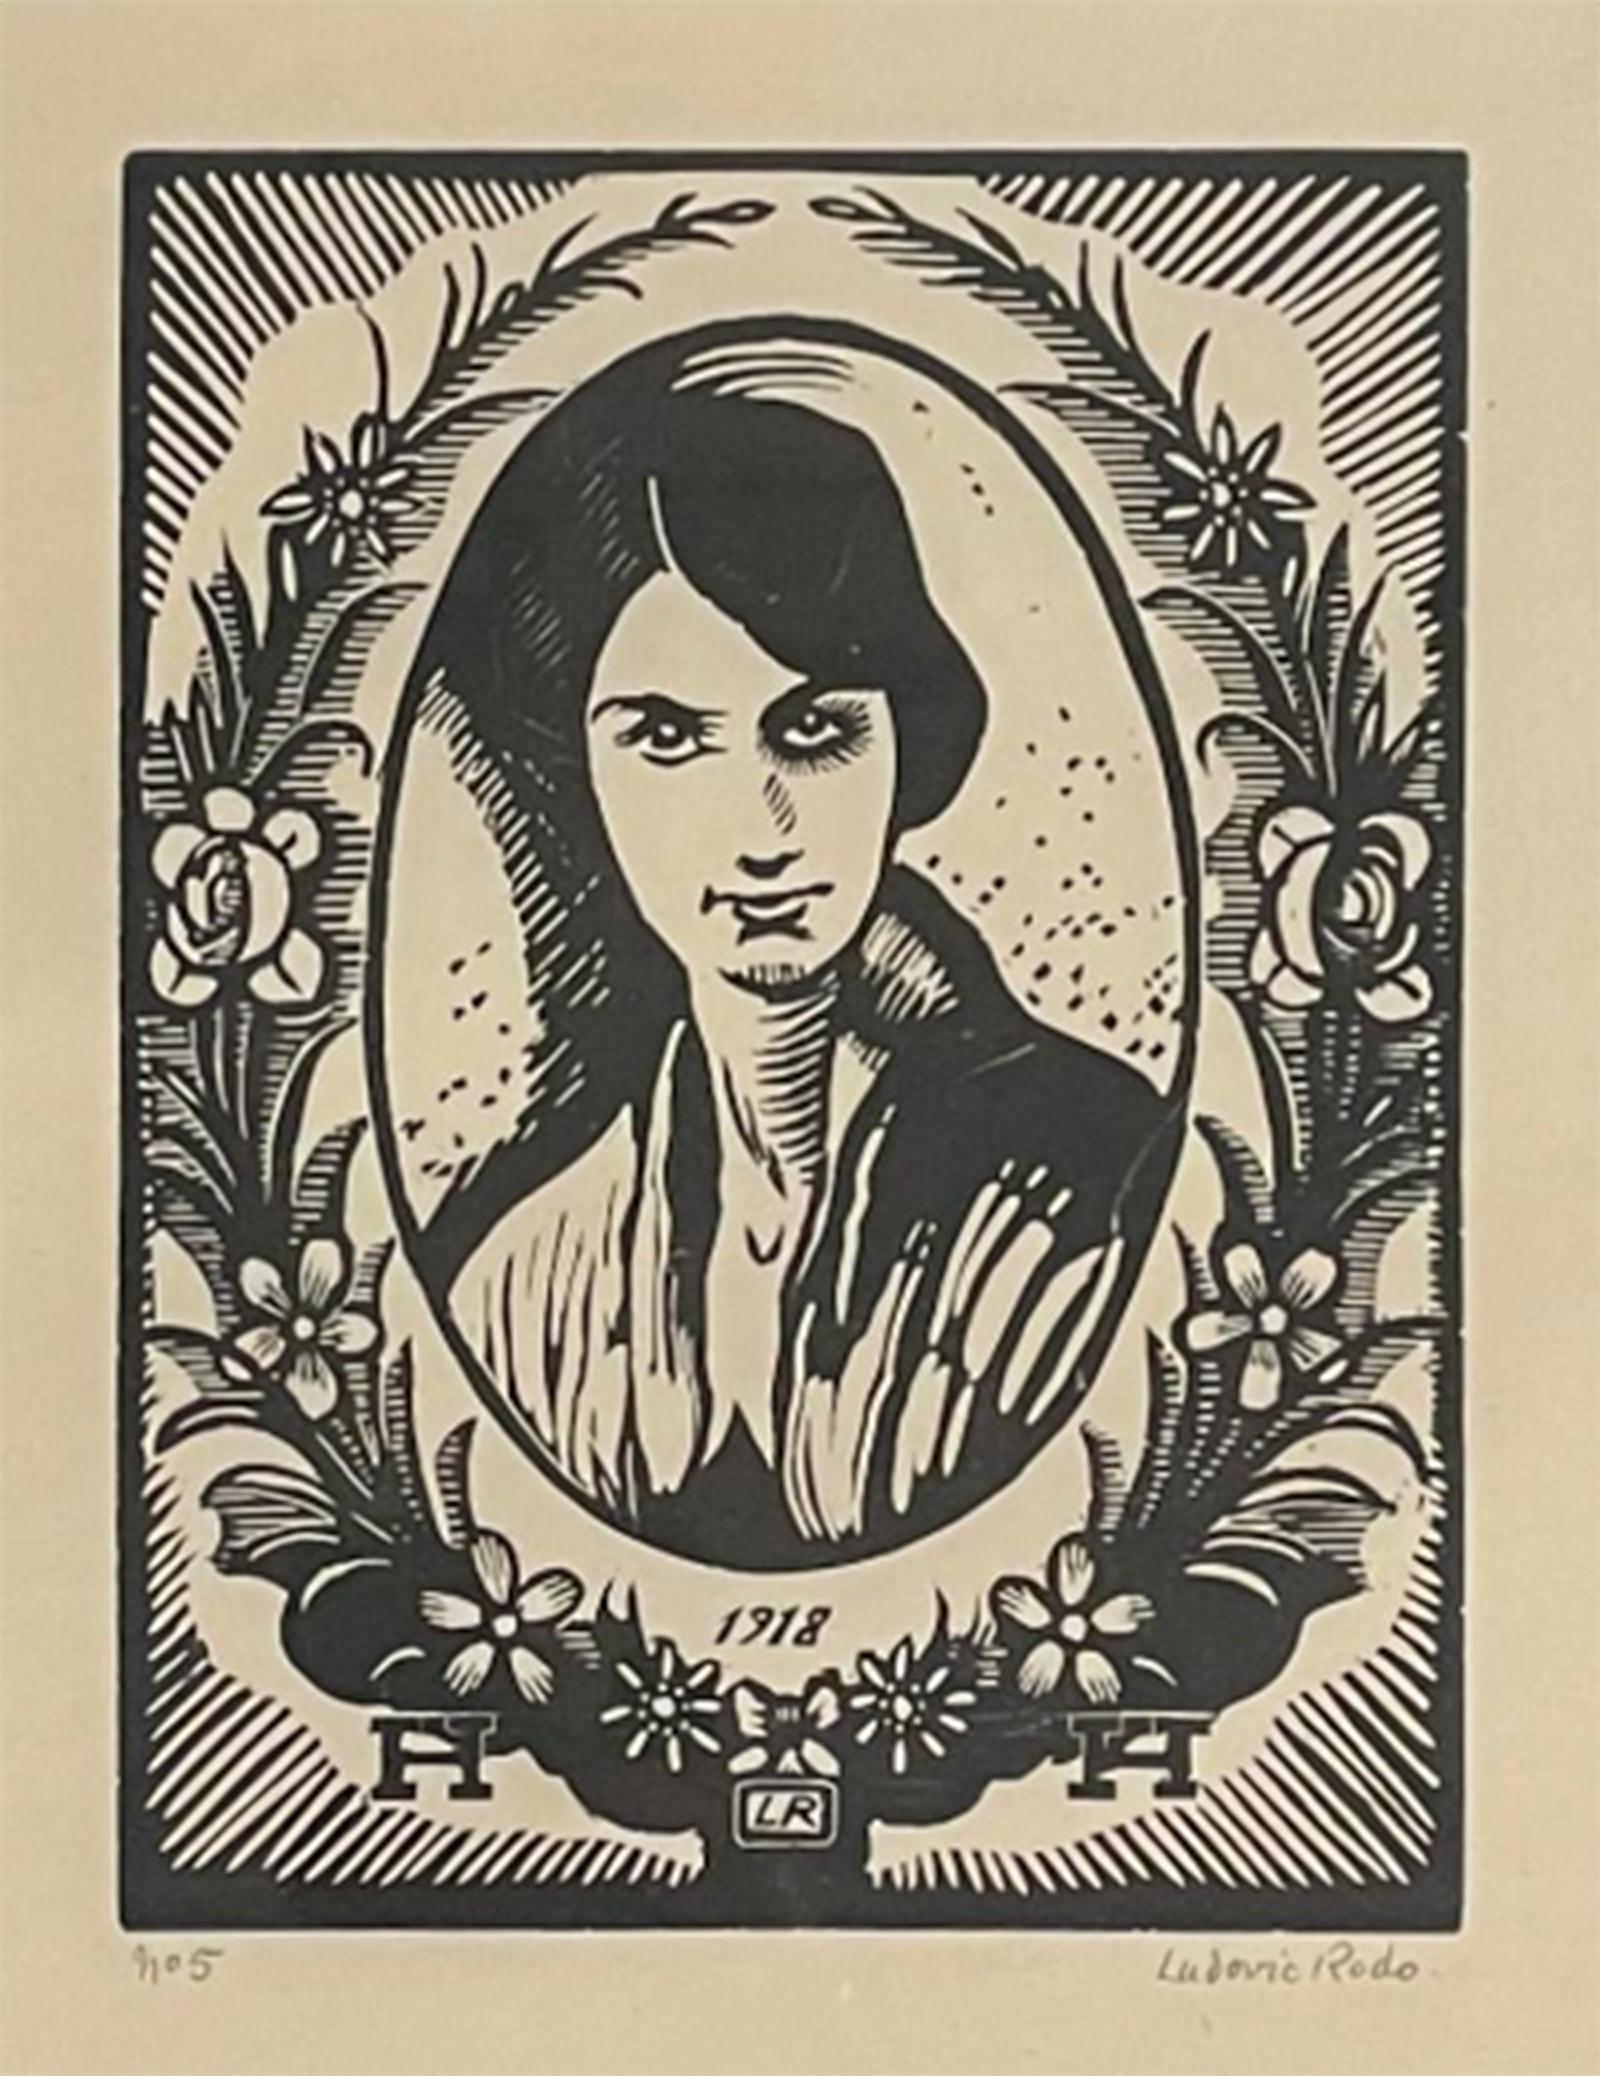 Oval Portrait by Ludovic-Rodo Pissarro (1878 - 1952)
Woodcut
15.1 x 11.3 cm (6 x 4¹/₂ inches)
Initialled, inscribed and dated 1918 in the plate
Signed lower right, Ludovic Rodo and numbered lower left, 5

Biography
Ludovic-Rodolphe Pissarro, born in